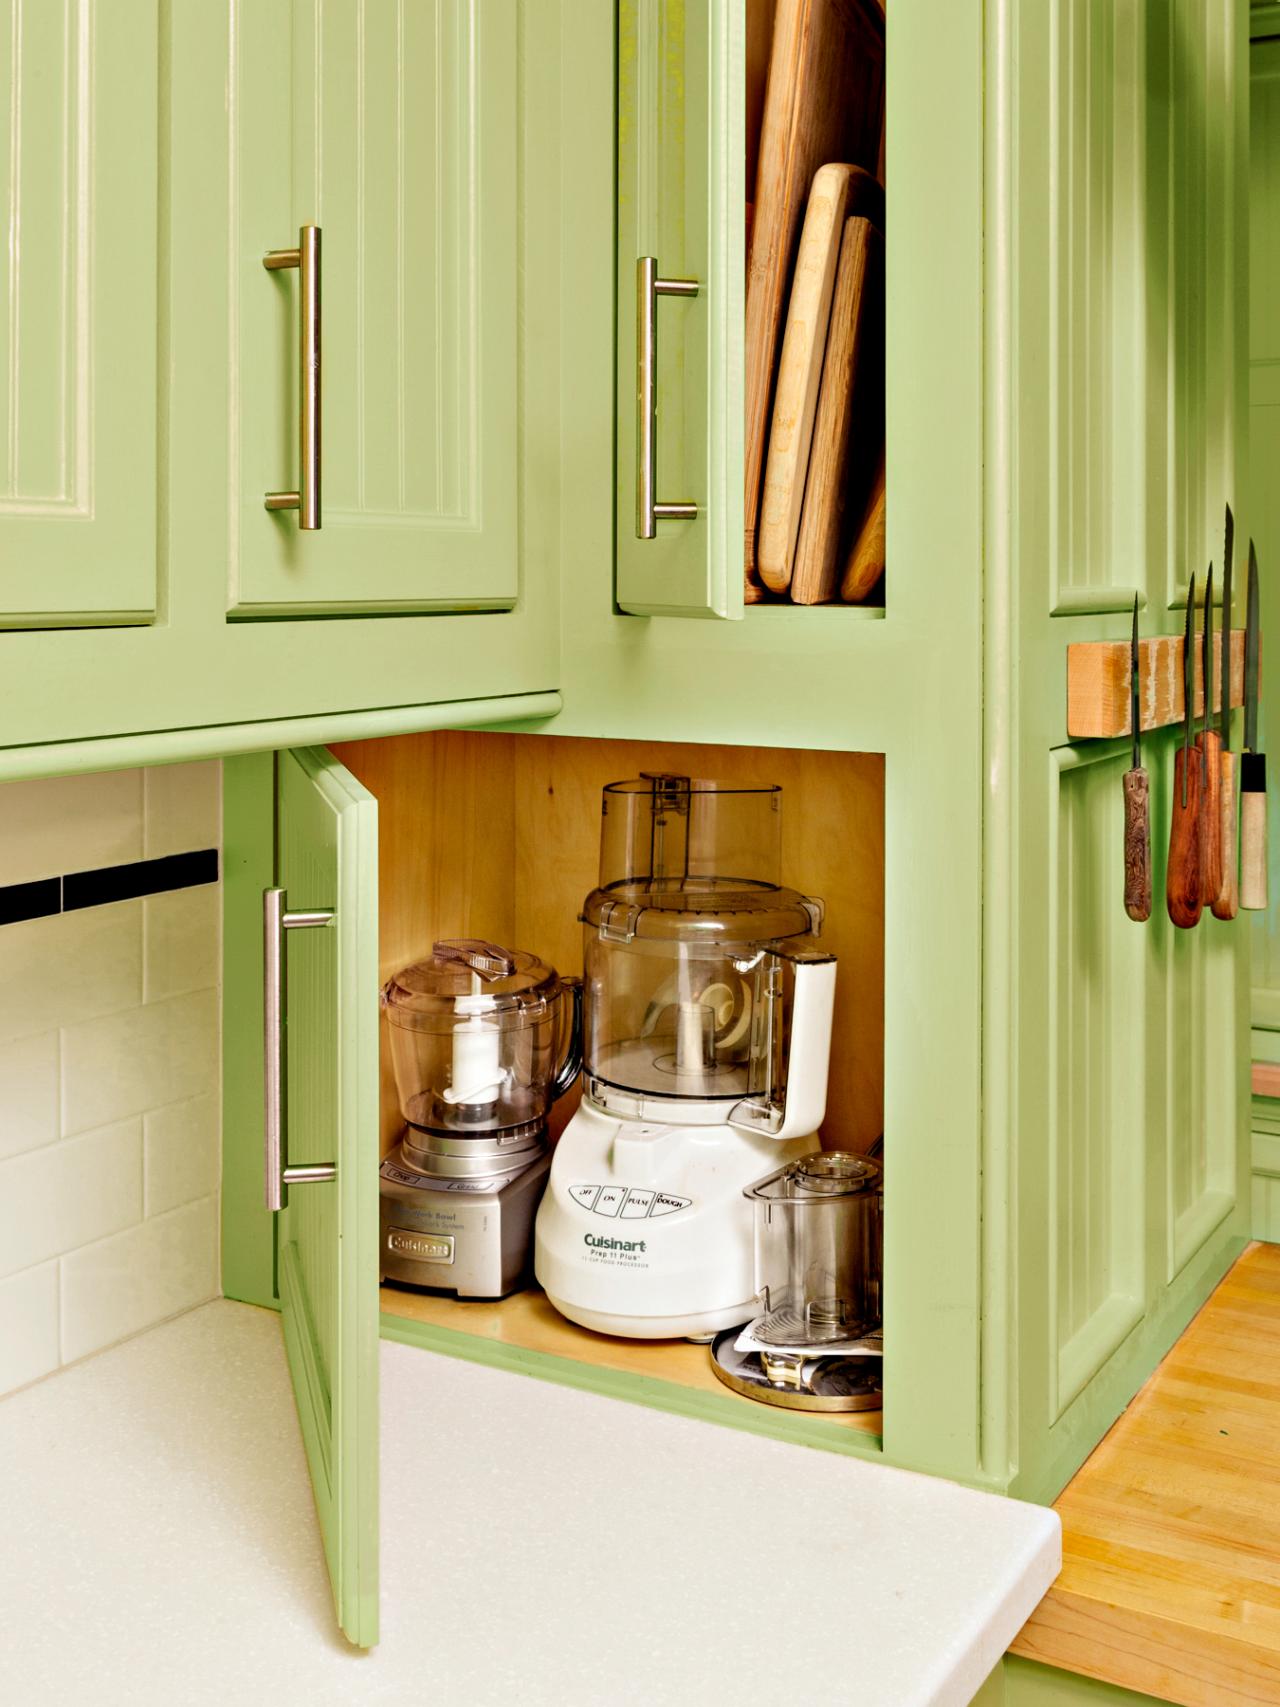 Painting Kitchen Appliances: Pictures & Ideas From HGTV | HGTV